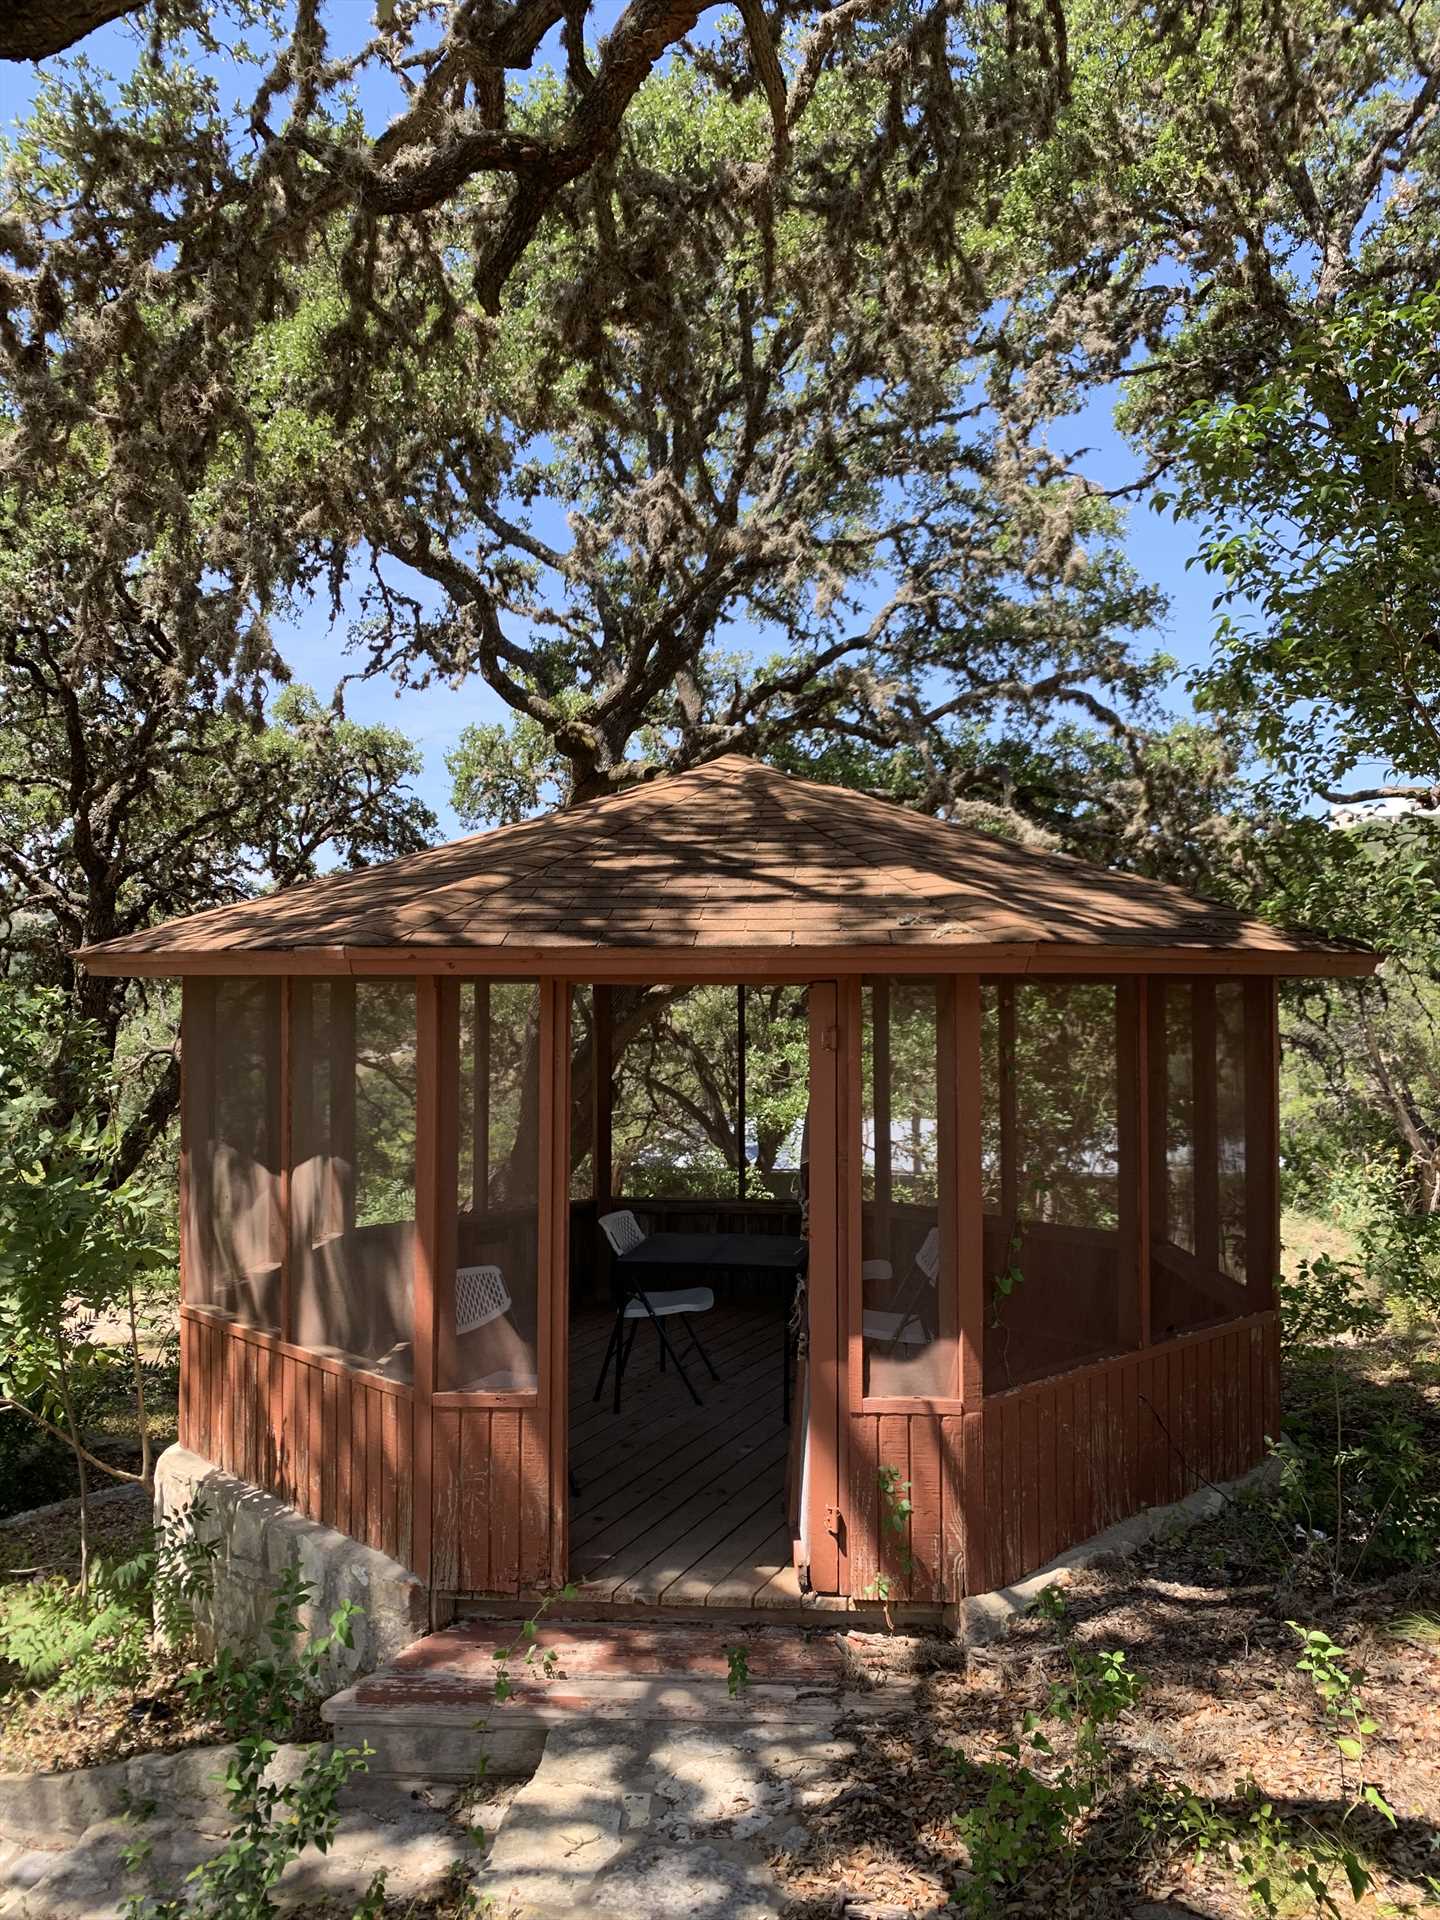                                                 The quaint gazebo on the ranch is situated perfectly in a cool and shady spot!